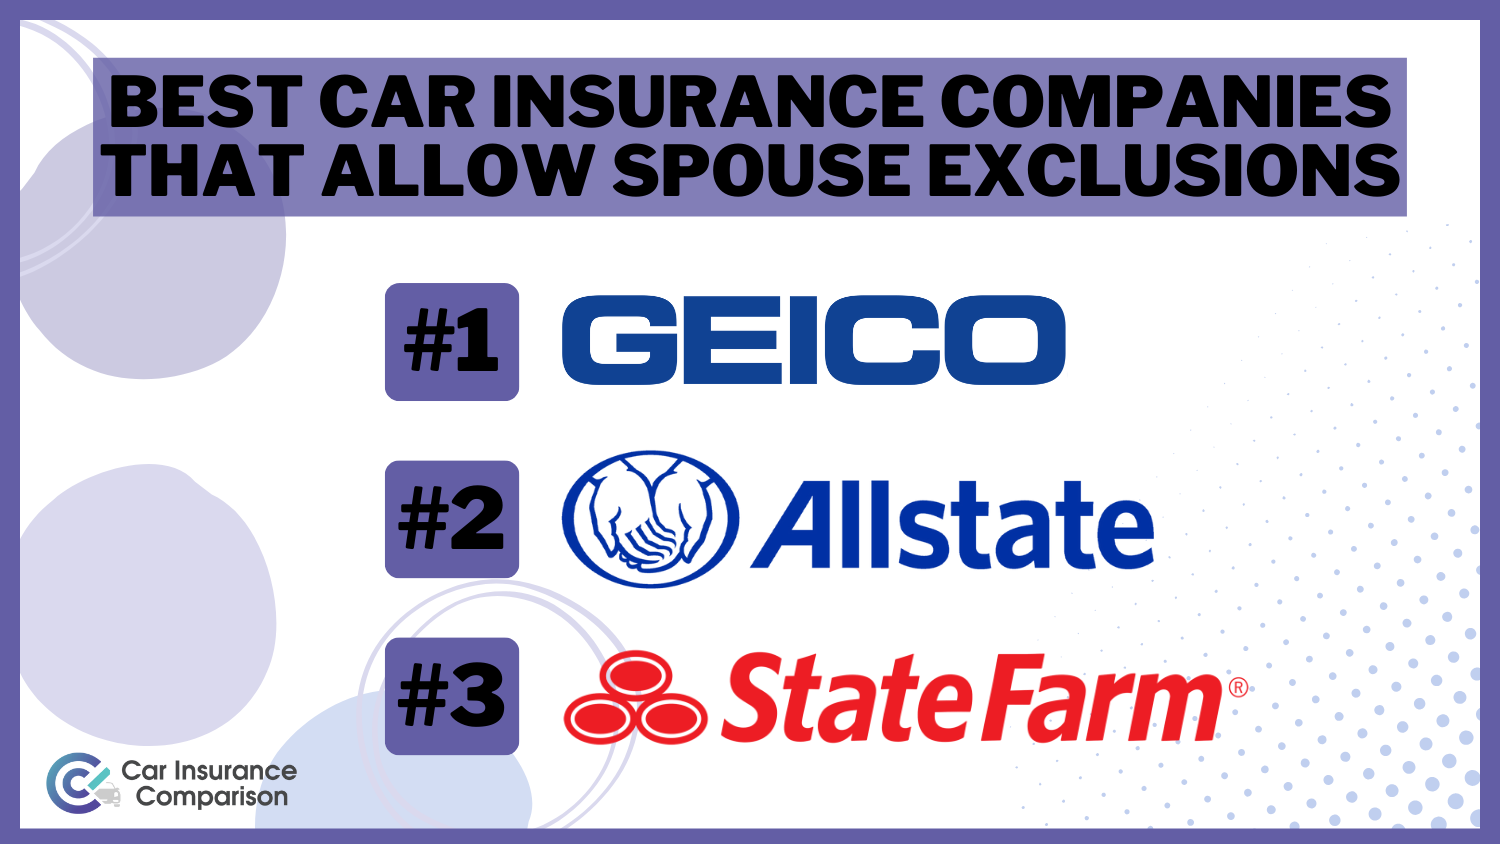 Geico, Allstate, State Farm: Best Car Insurance Companies That Allow Spouse Exclusions